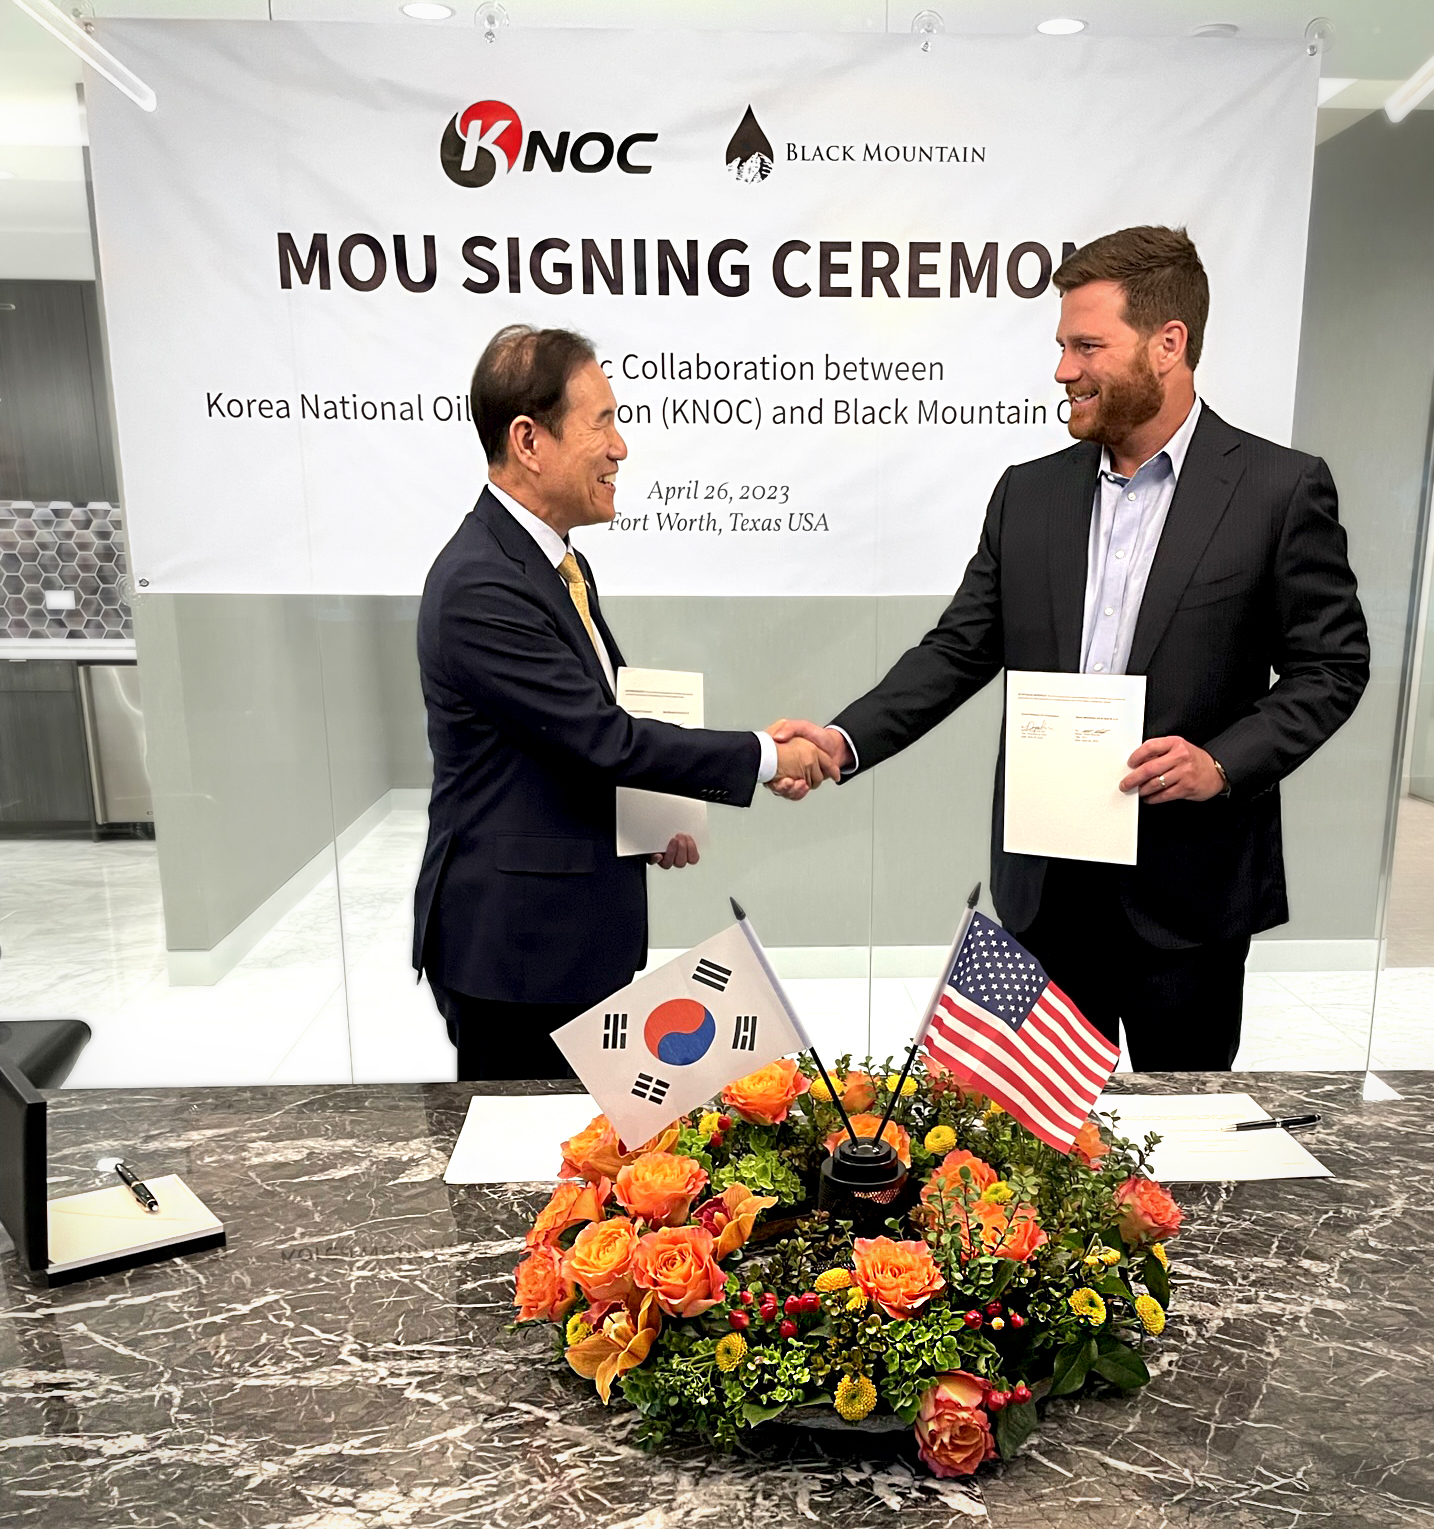 Black Mountain's Rhett Bennett and Korea National Oil Corporation's Dr. Dong S. Kim shake hands after signing a MOU for strategic collaboration between the companies.